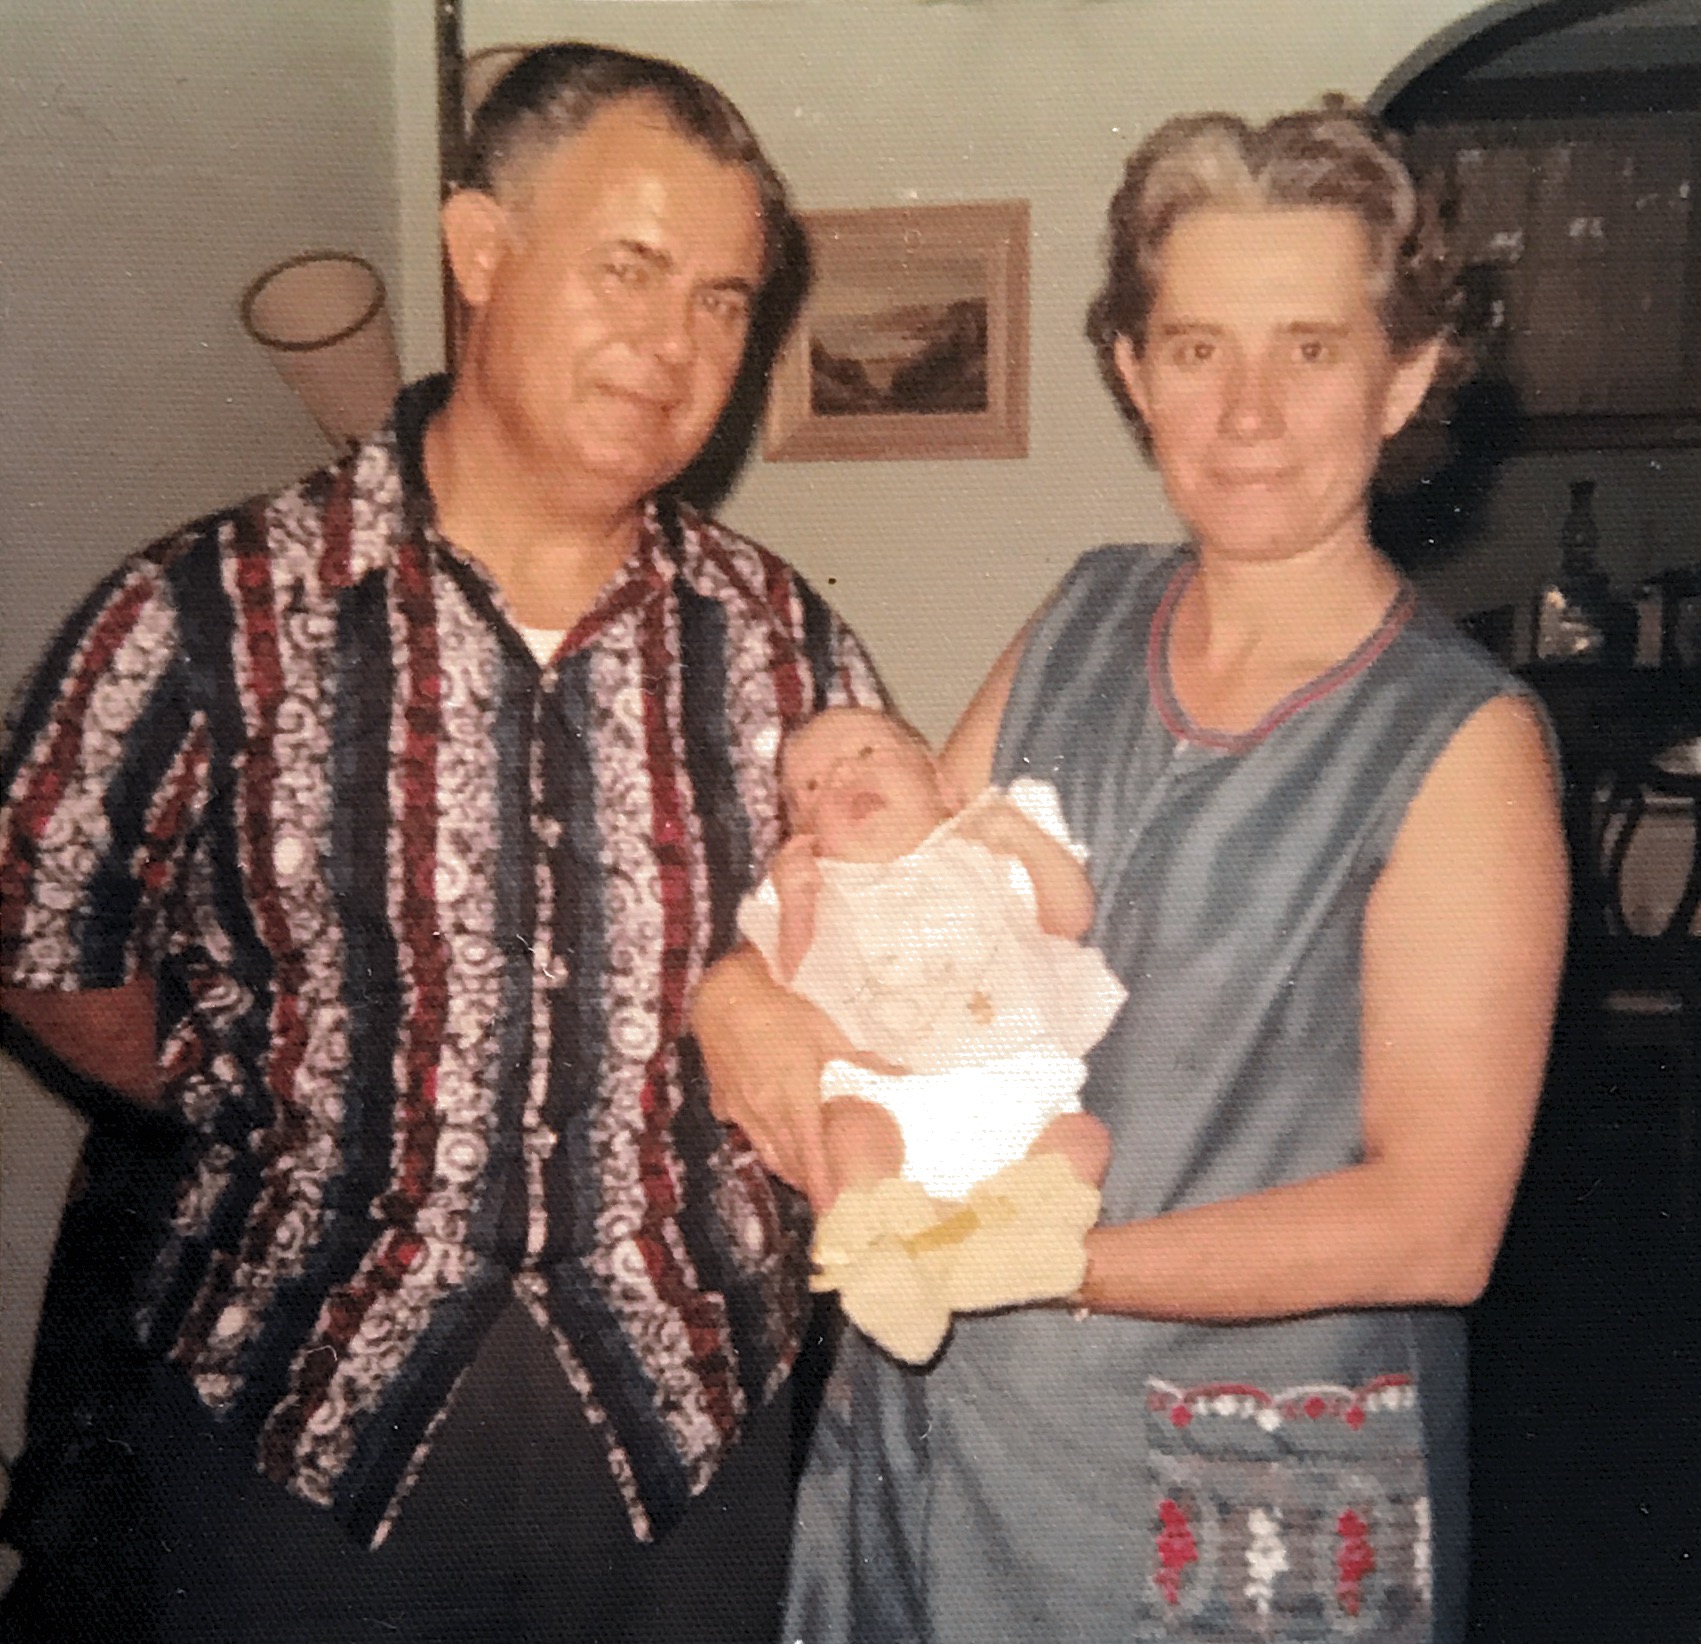 Roy and Vera Crane with their first granddaughter, Cynthia Ann McGuire, born in Greenville, SC 7/18/1972 to David and Nancy McGuire